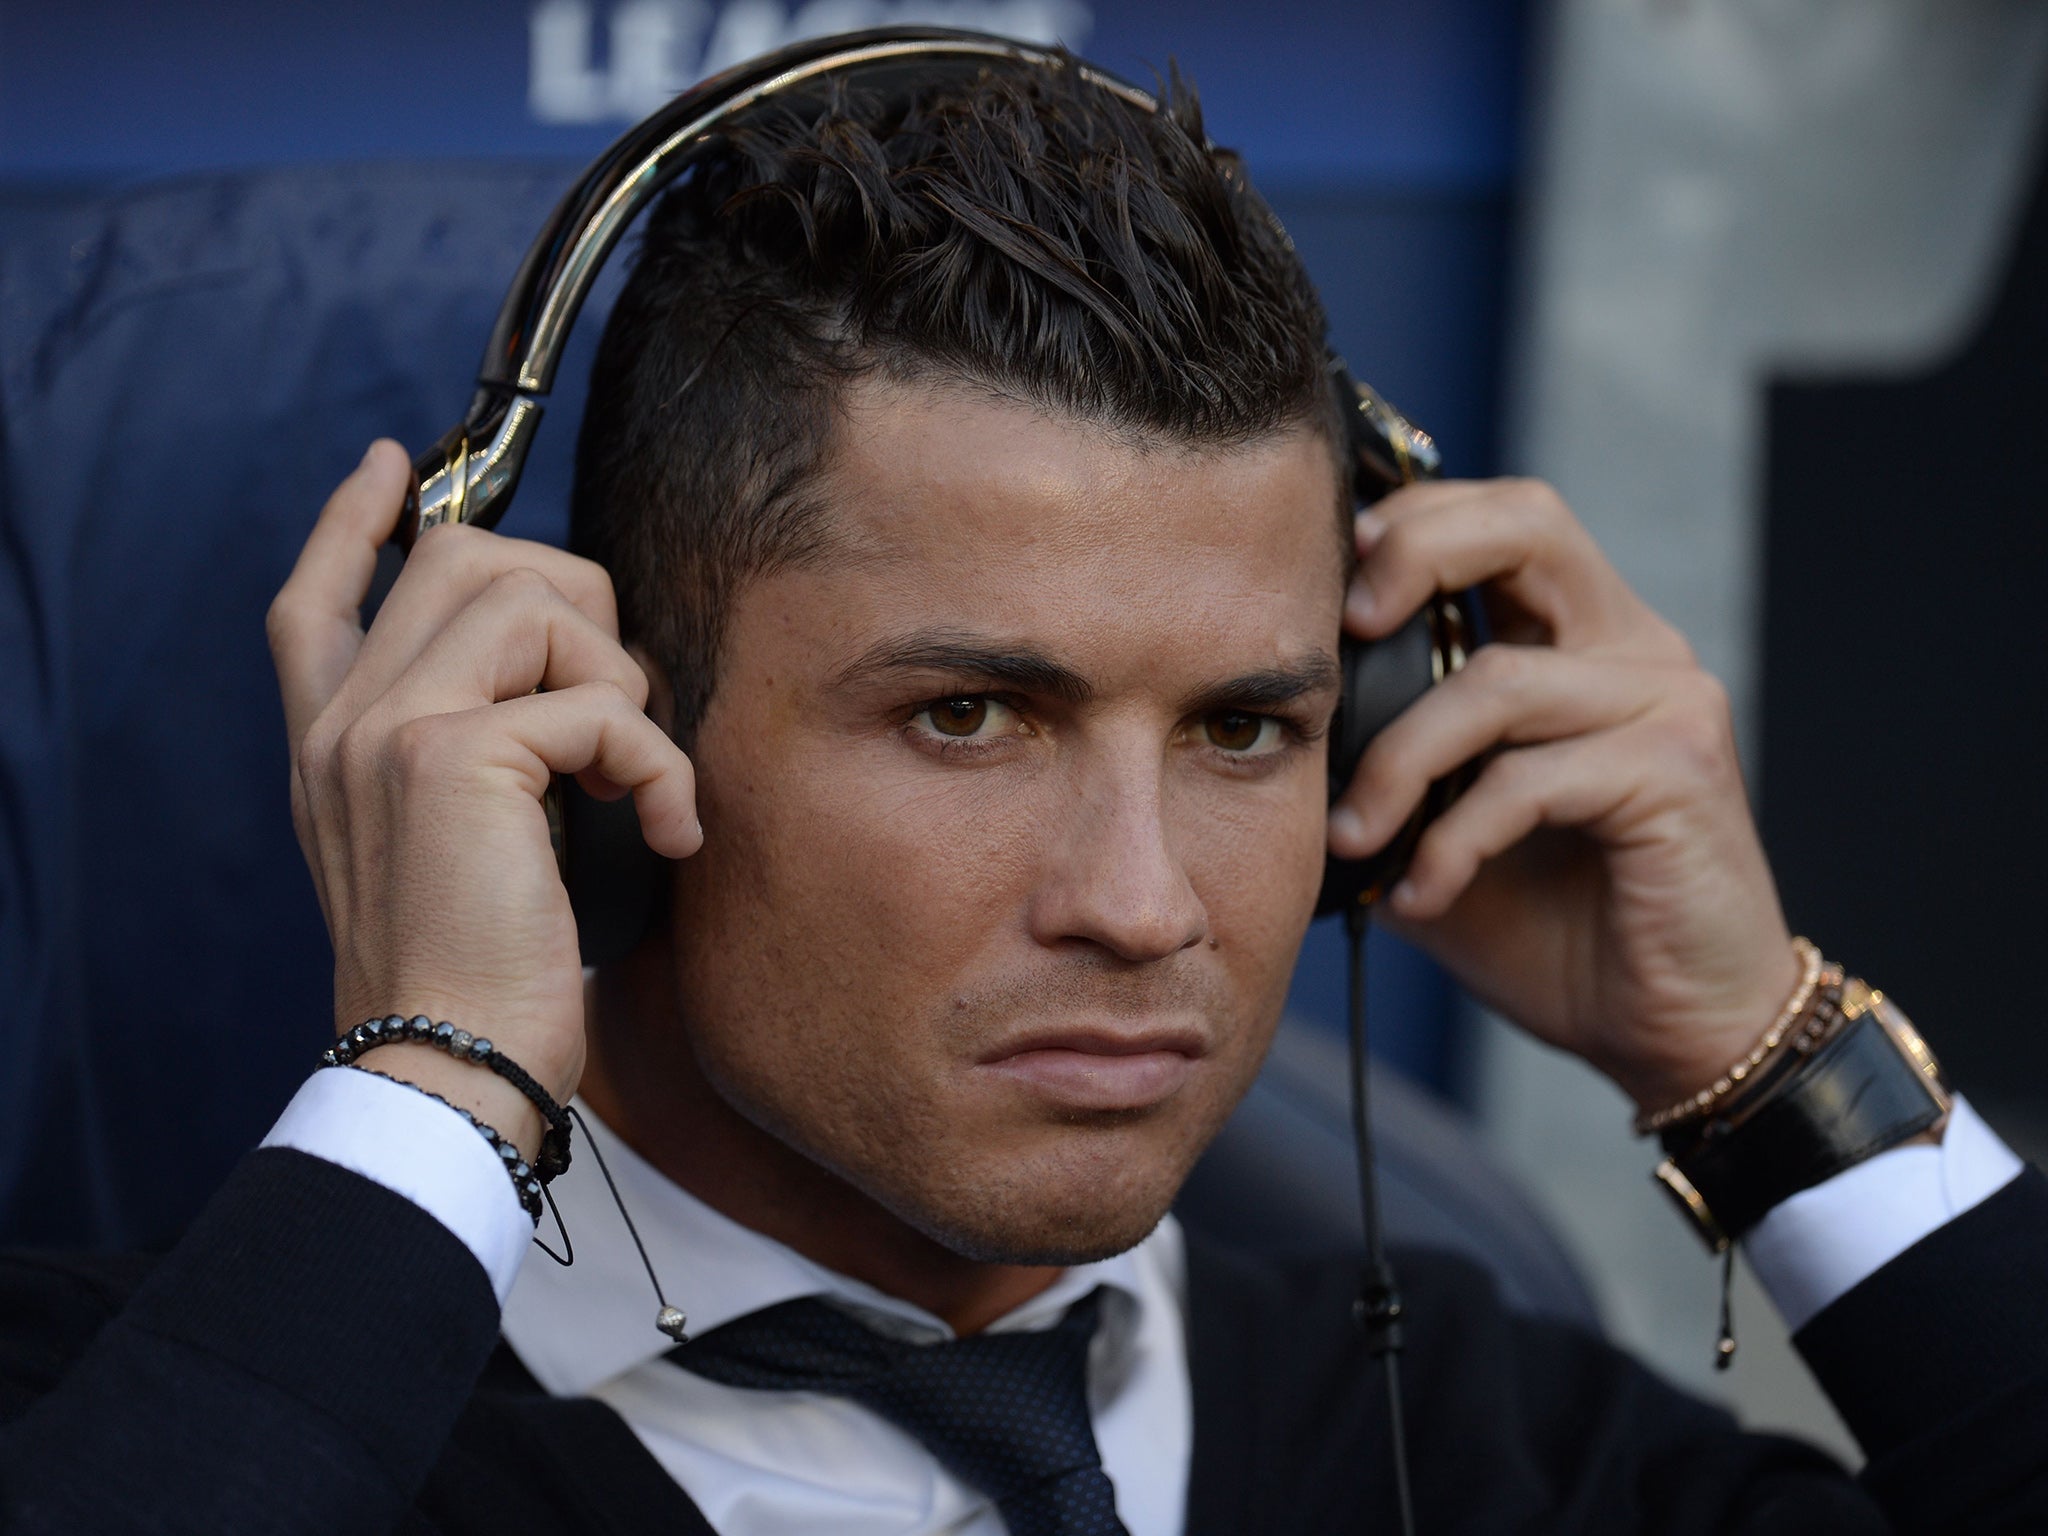 Ronaldo was not included in the matchday squad for Tuesday's goalless draw